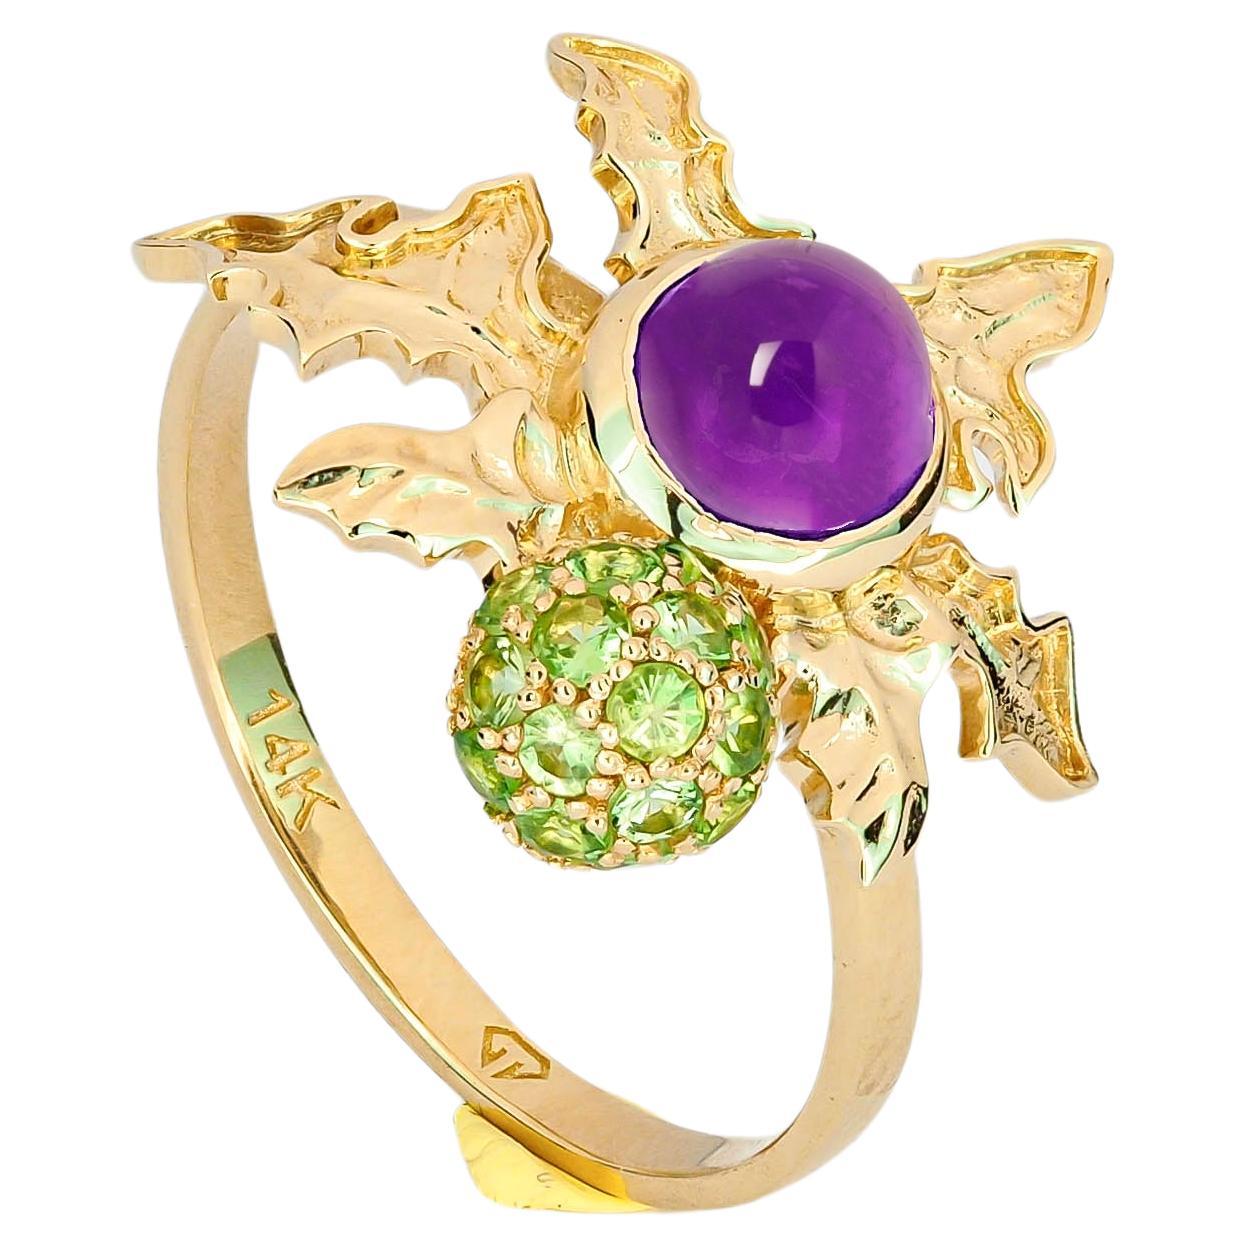 Thistle ring with amethyst in 14k gold.  For Sale